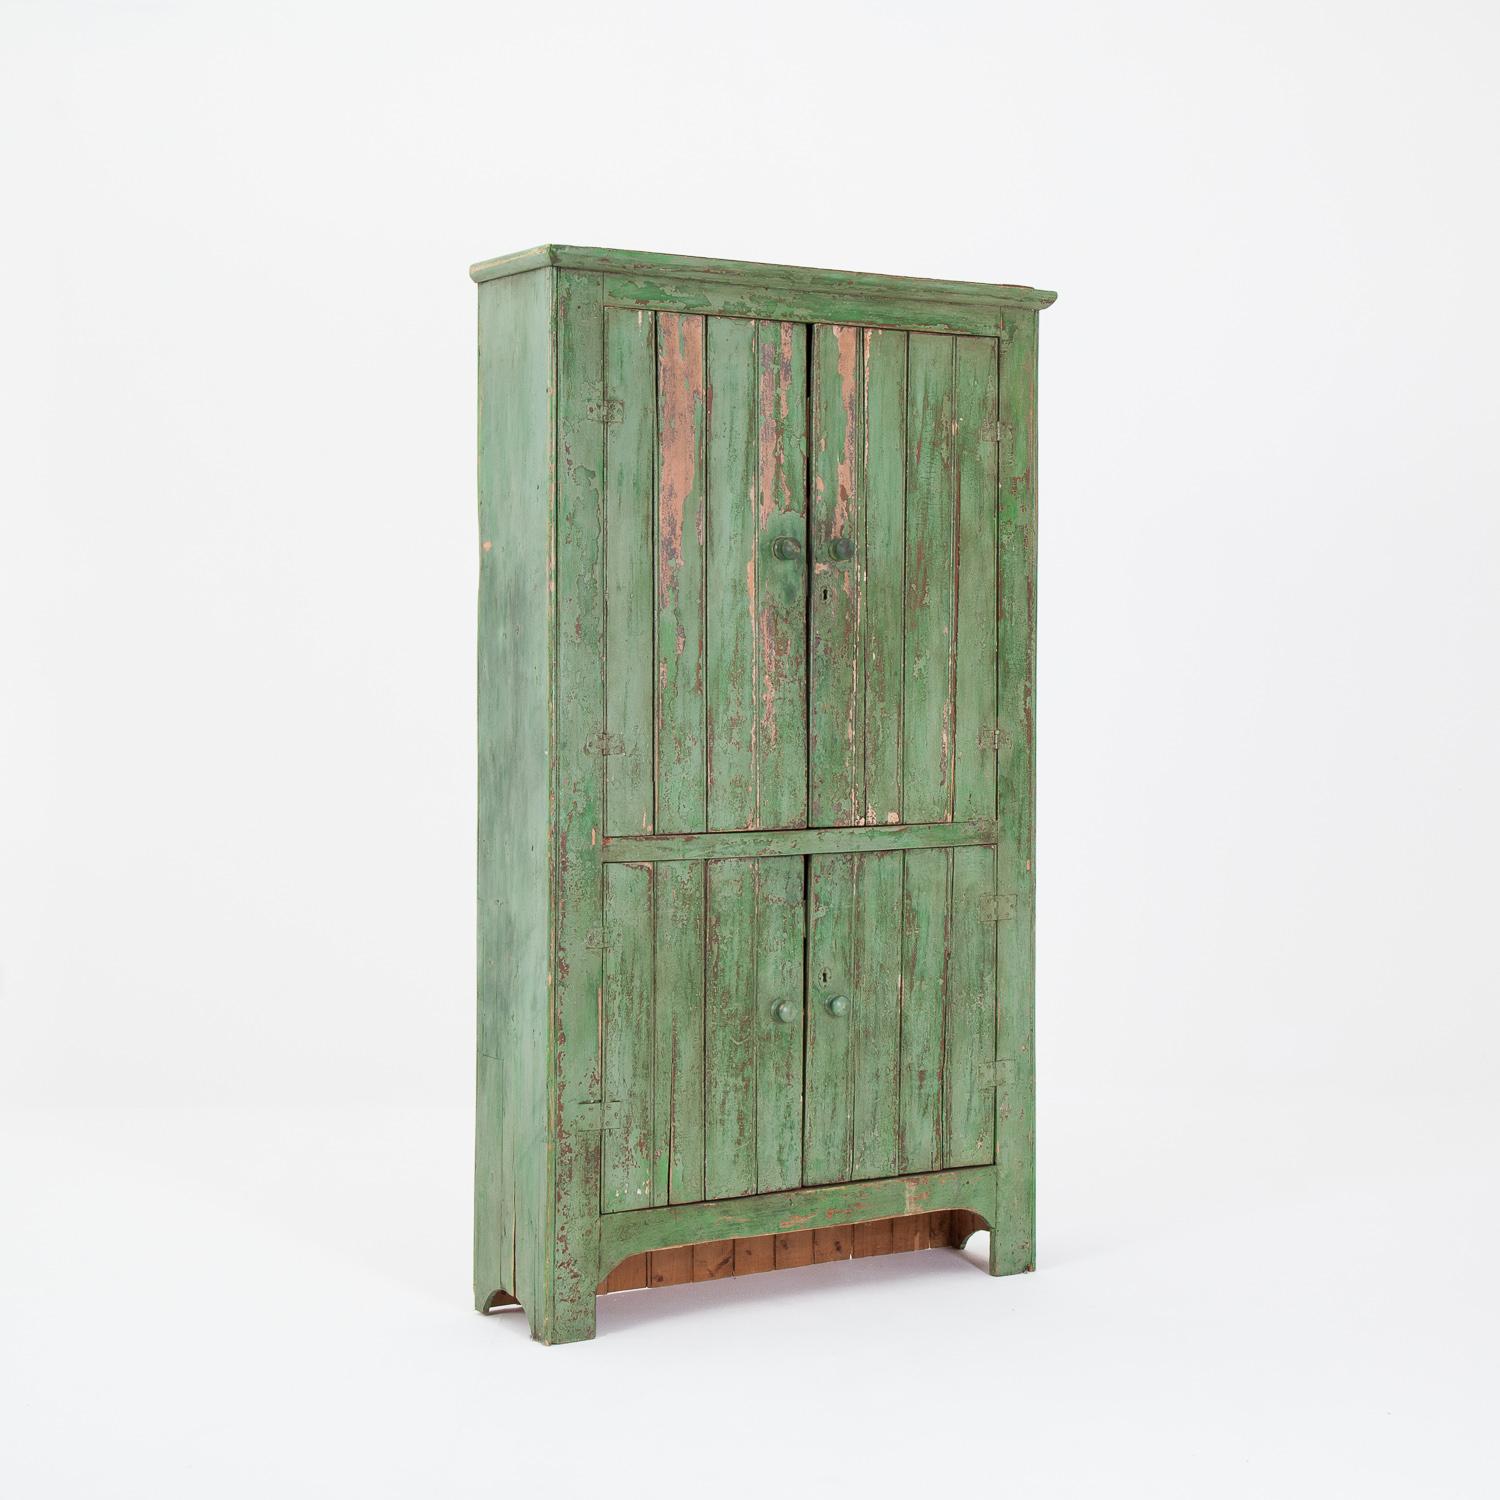 Charming pine painted green cupboard, in old paint.

The piece is shelved throughout. The back has been replaced at some point in the cupboard’s recent history.

Measures: Height 183cm x Width 106cm x Depth 29cm.
  